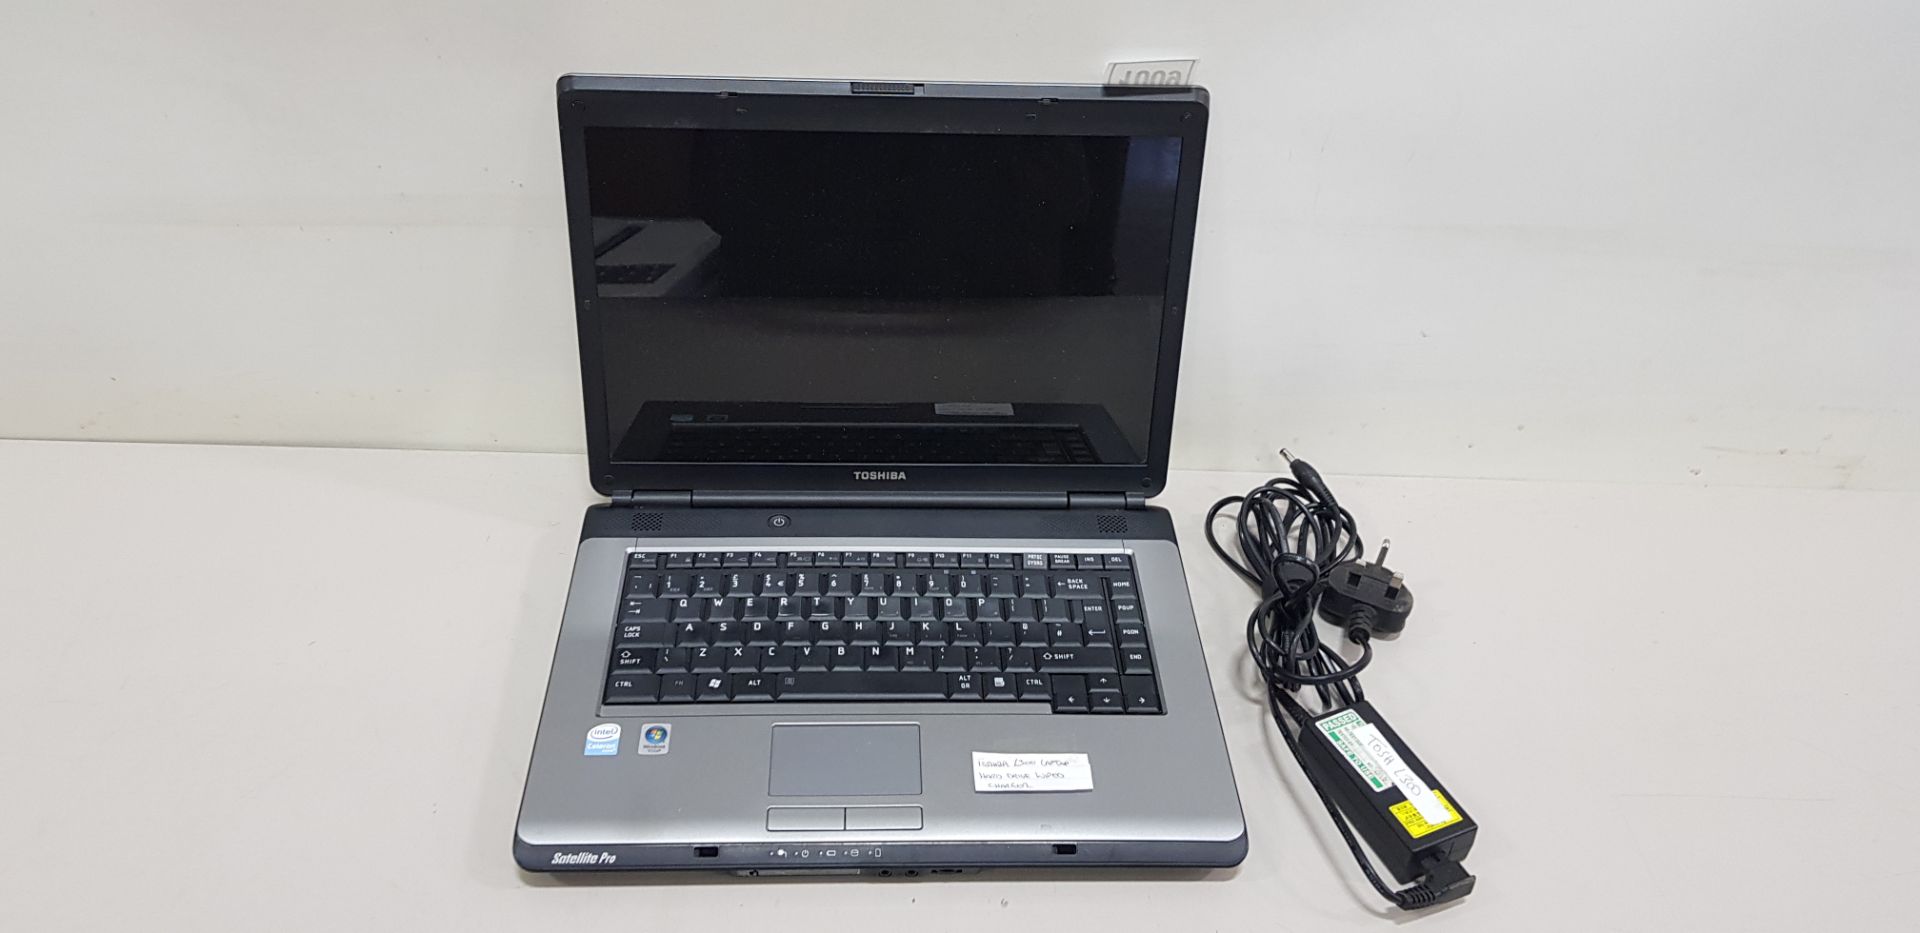 TOSHIBA L300 WINDOWS VISTA LAPTOP - HARD DRIVE WIPED - COMES WITH CHARGER